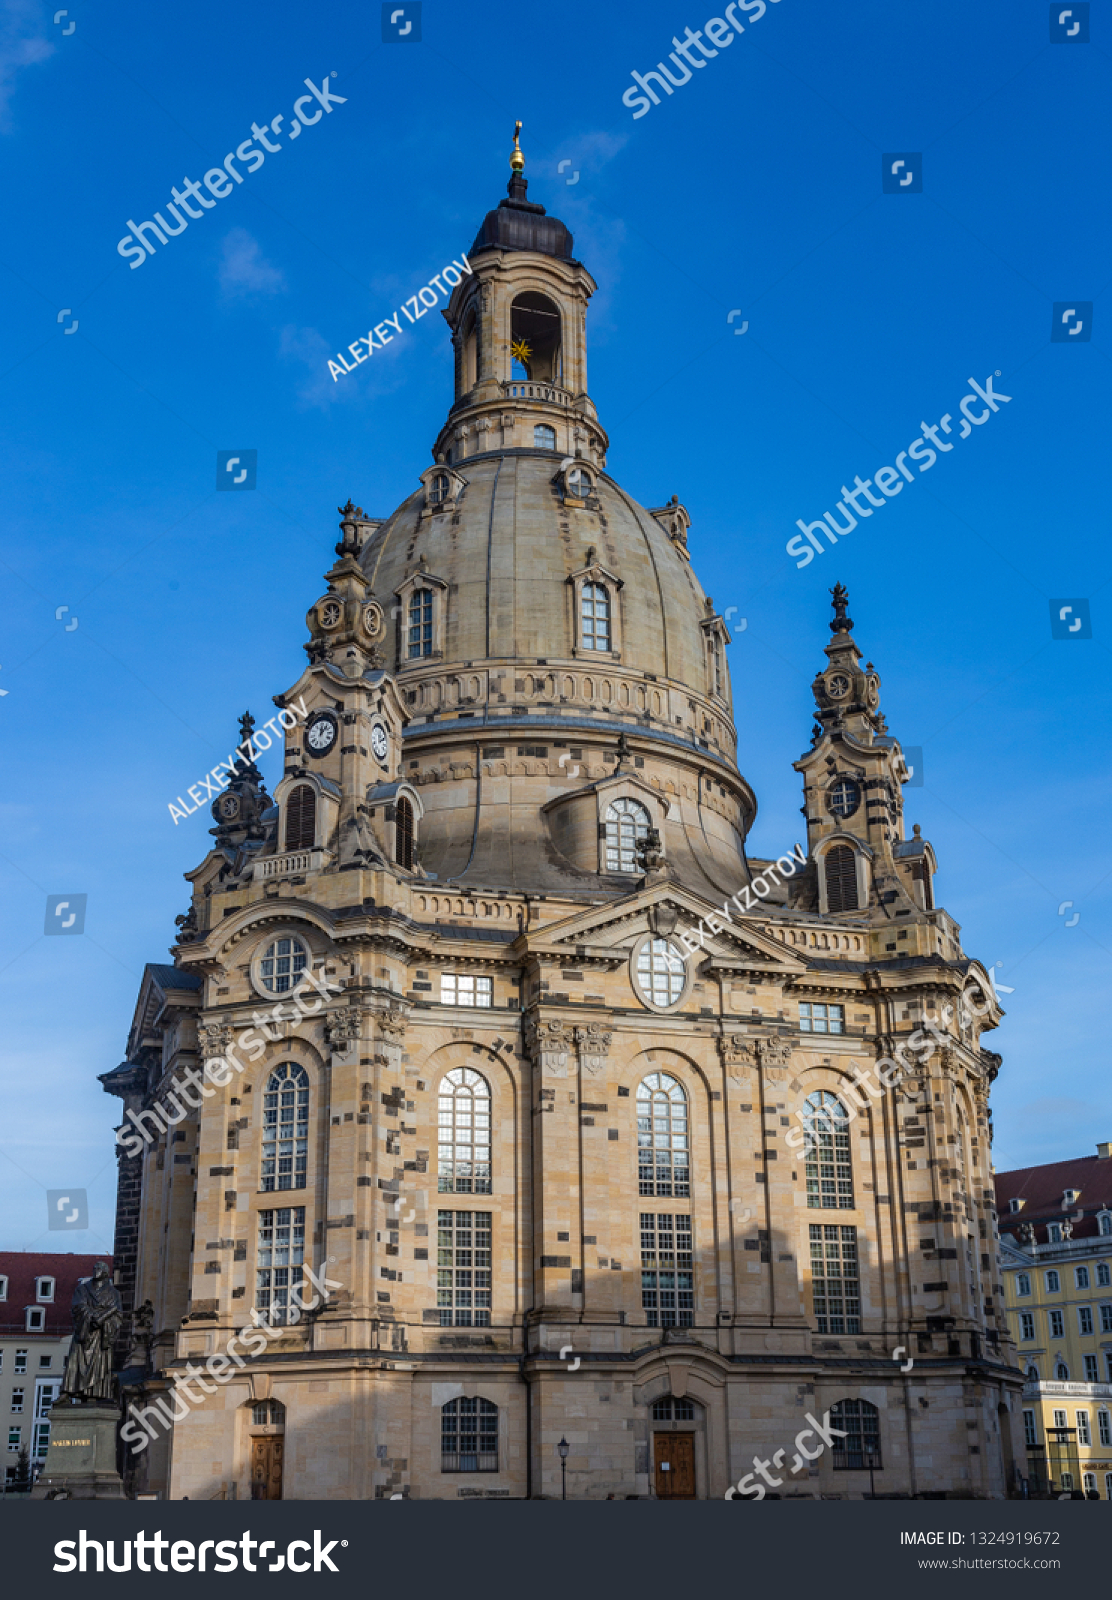 Church Frauenkirche (Church of the Virgin) in Dresden, one of the most significant Lutheran churches of the city #1324919672